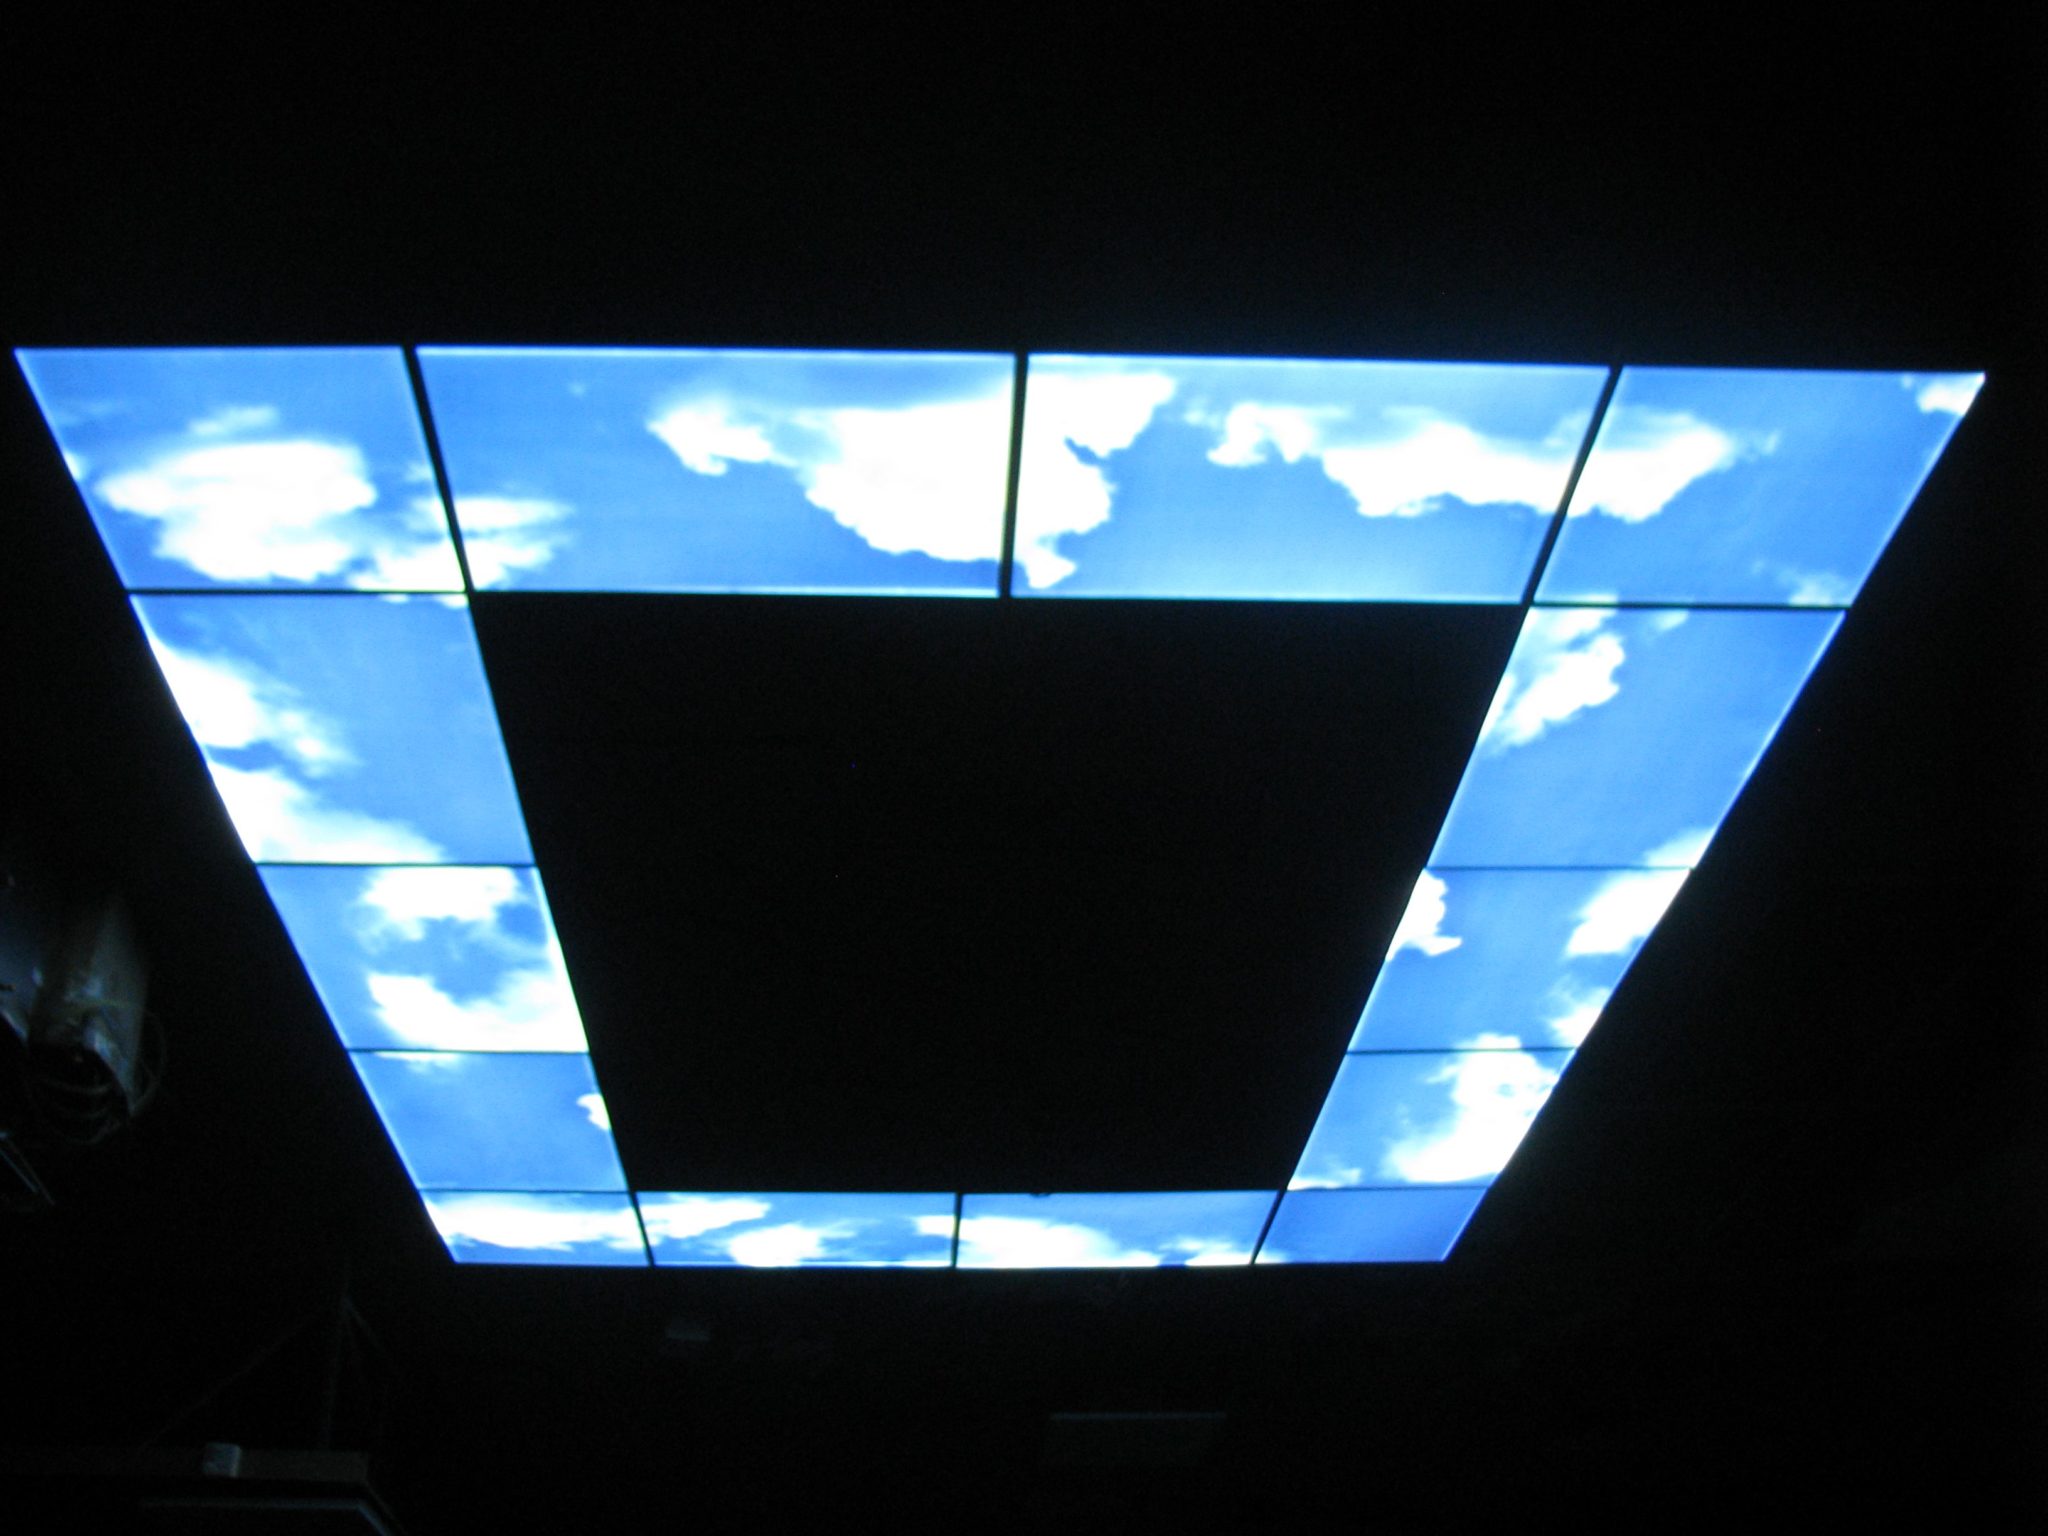 1200x600 LED Sky Panels - Architectural Lighting Feature